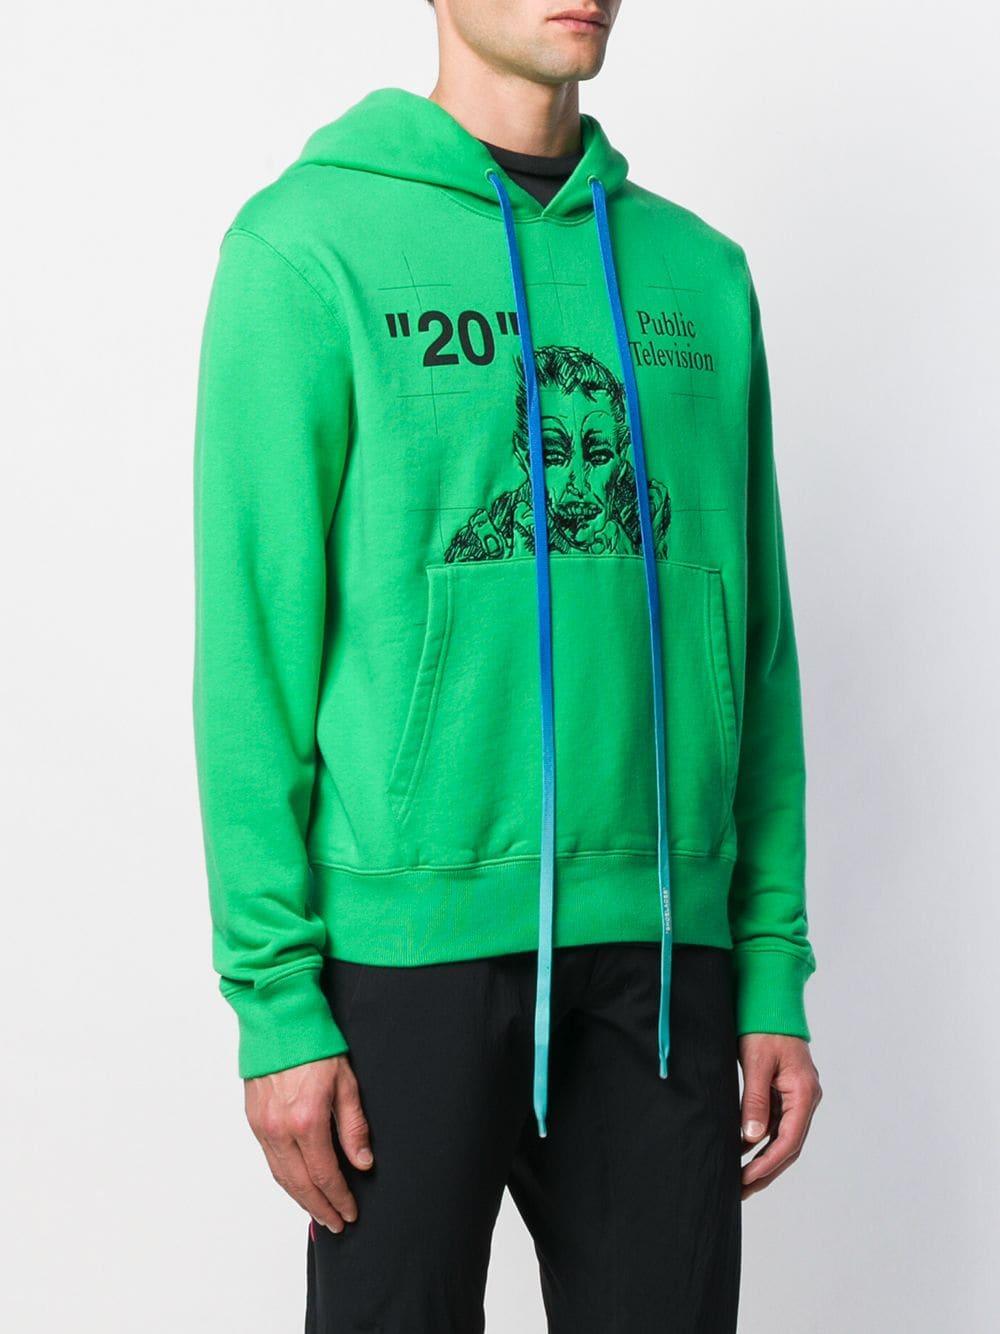 Off-White c/o Virgil Abloh Cotton Public Television Hoodie in Green for Men  | Lyst